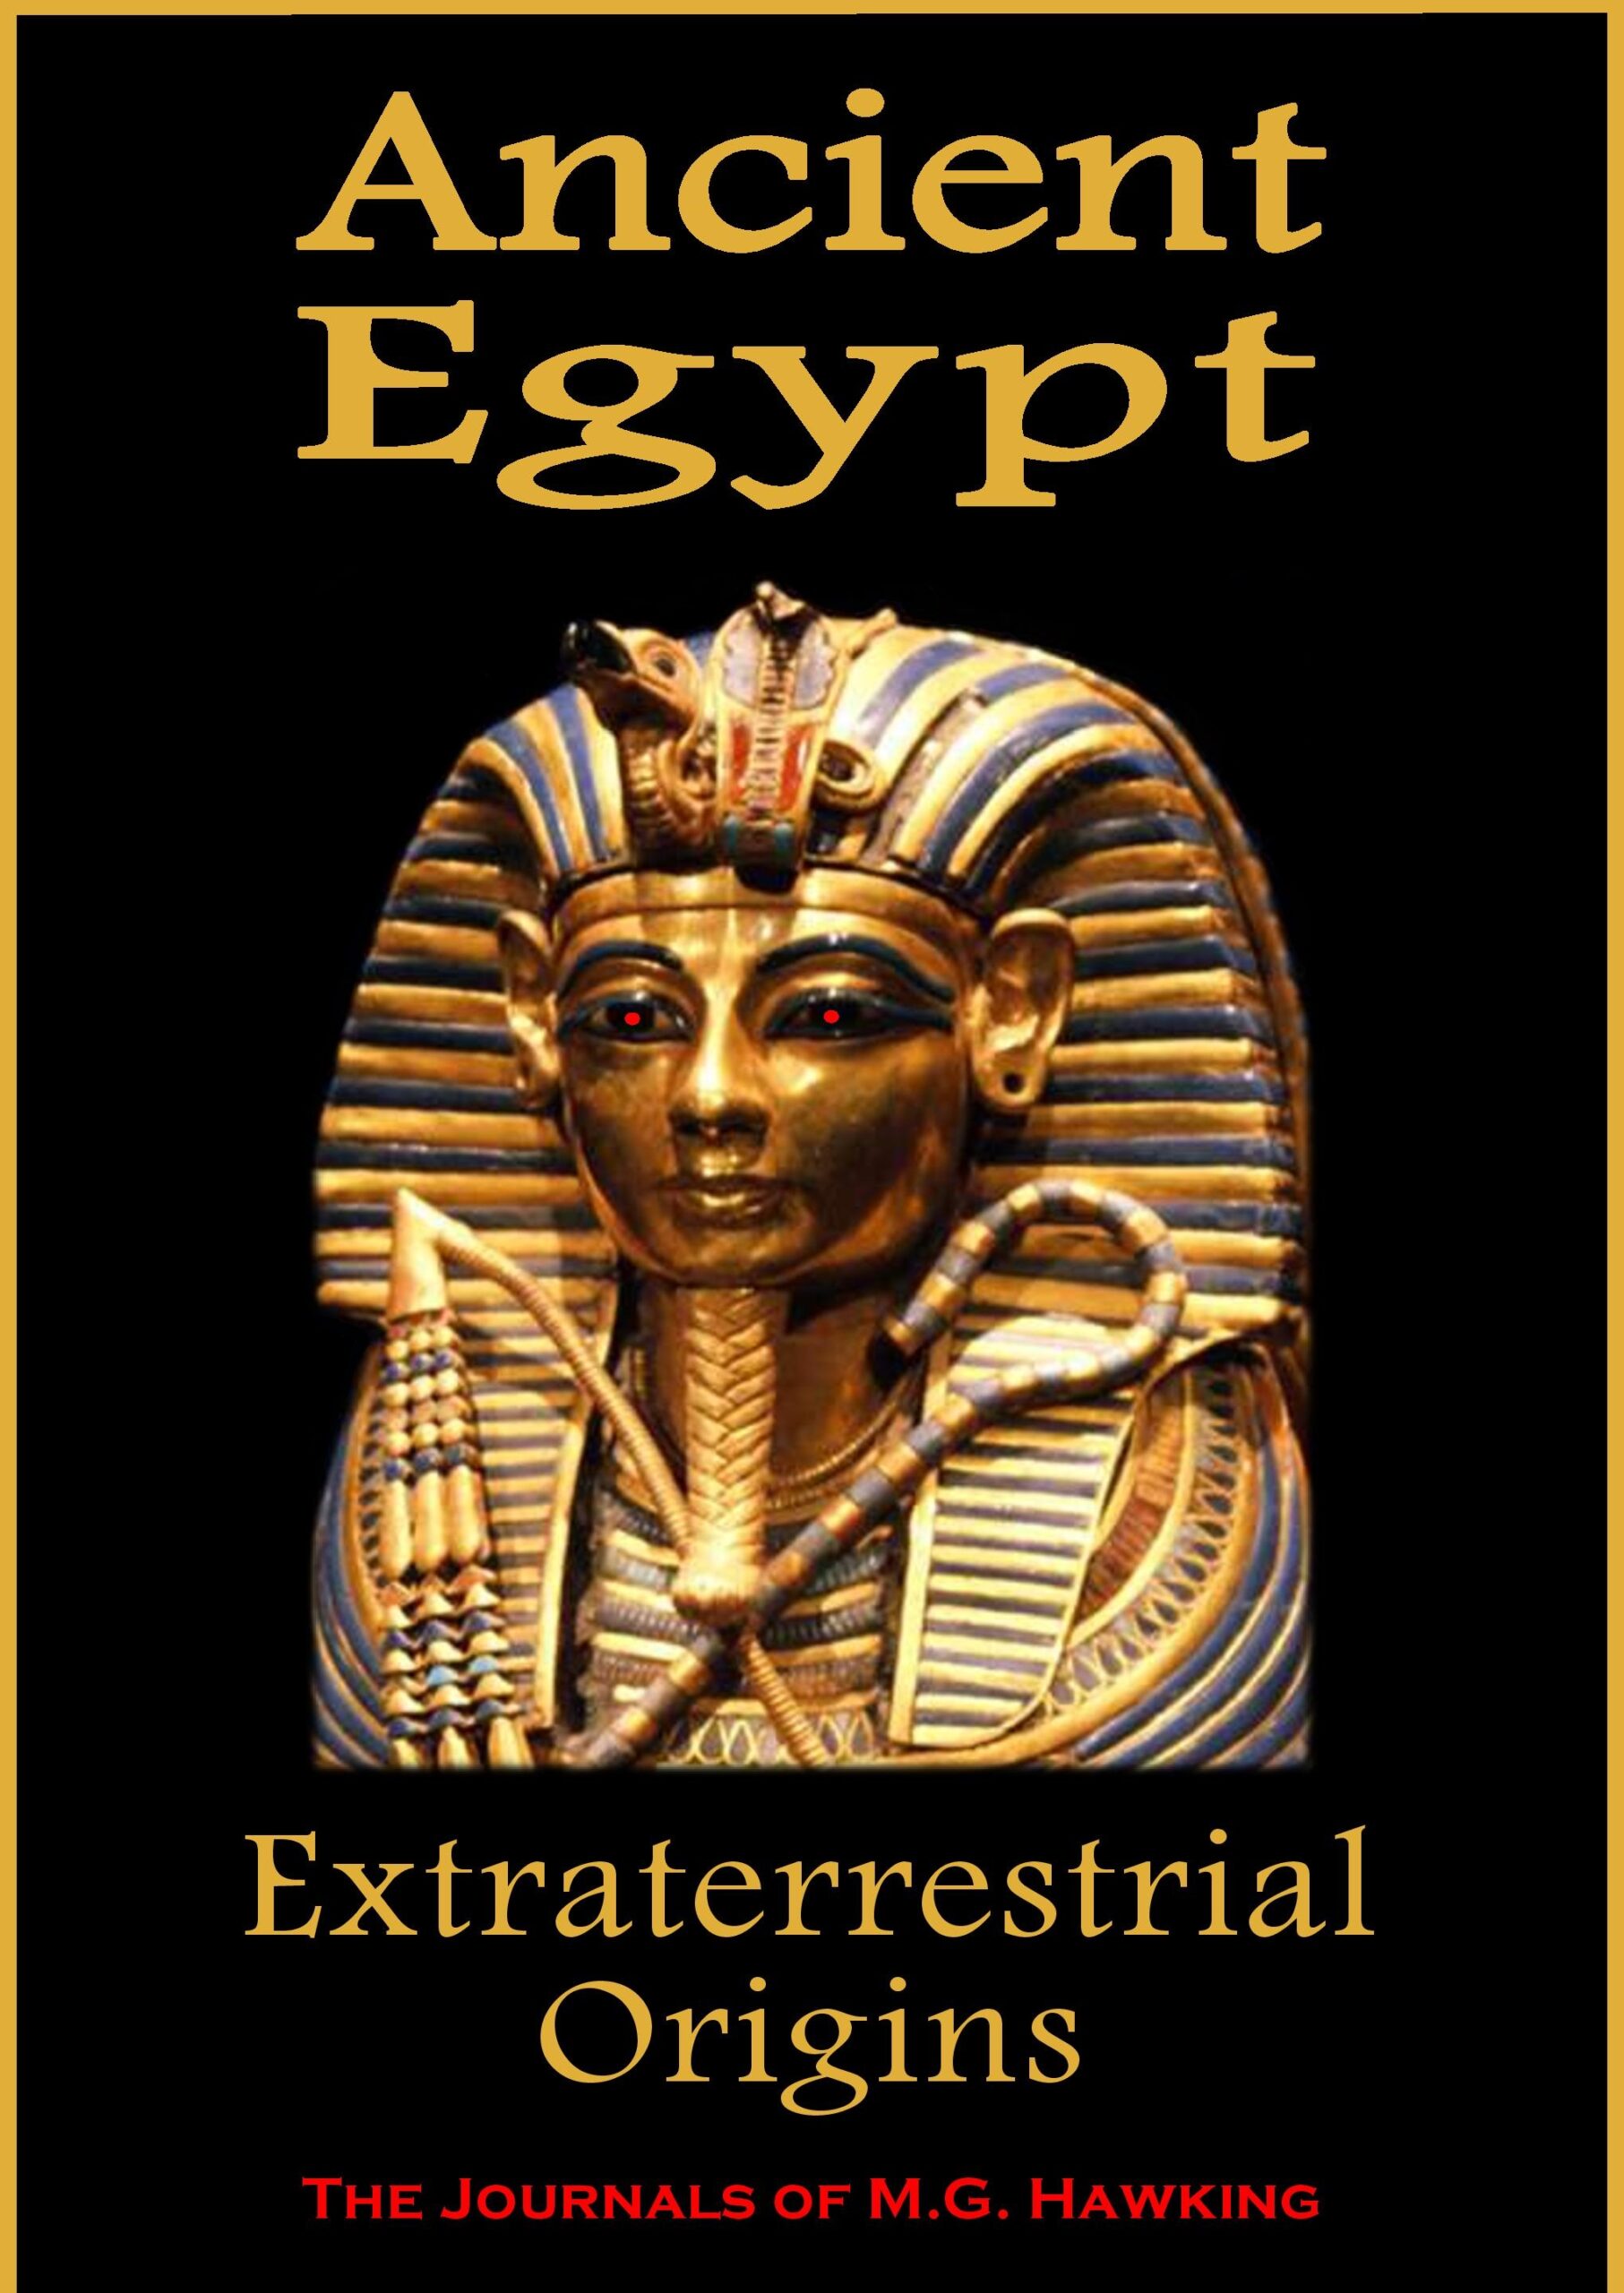 FREE: Ancient Egypt, Extraterrestrial Origins by M.G. Hawking